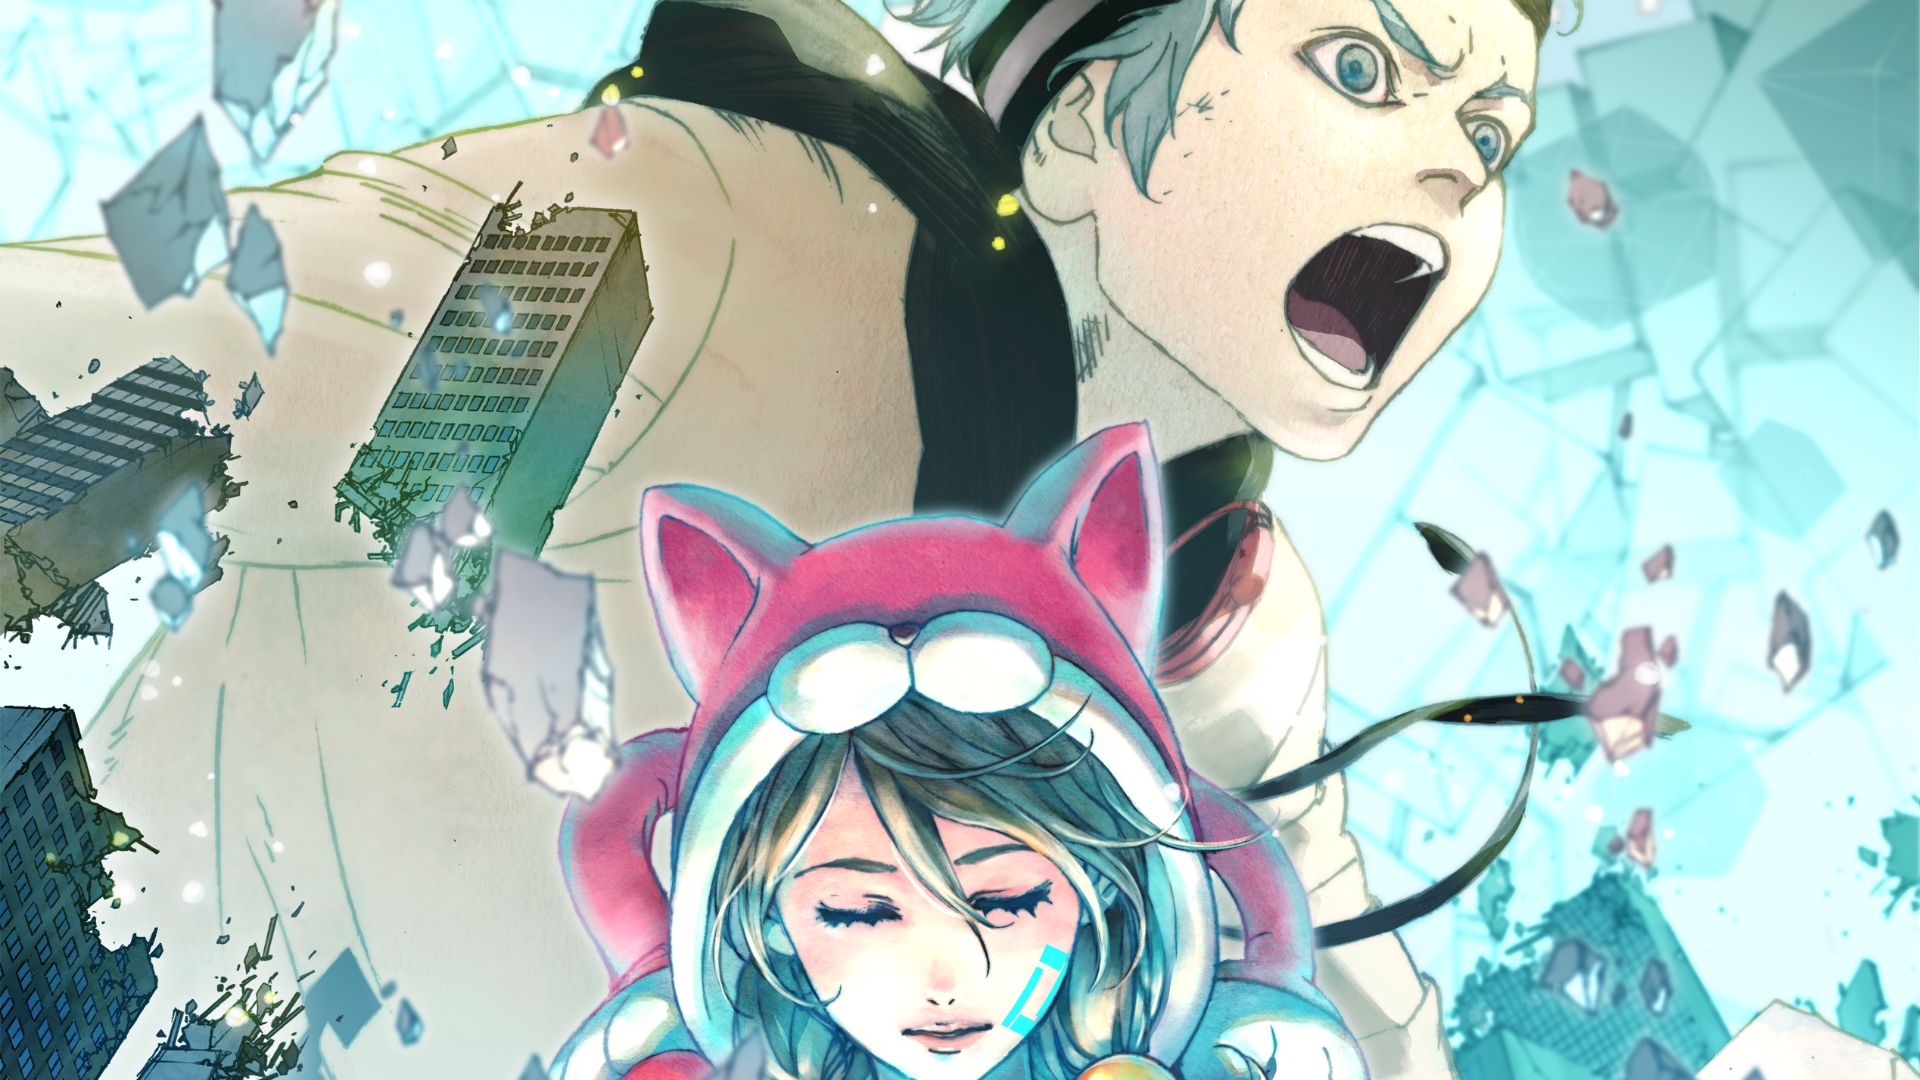 Anonymous code hero art showing two characters, on below, a woman in a pink onesie, one above and massive, a boy with turquoise hair.